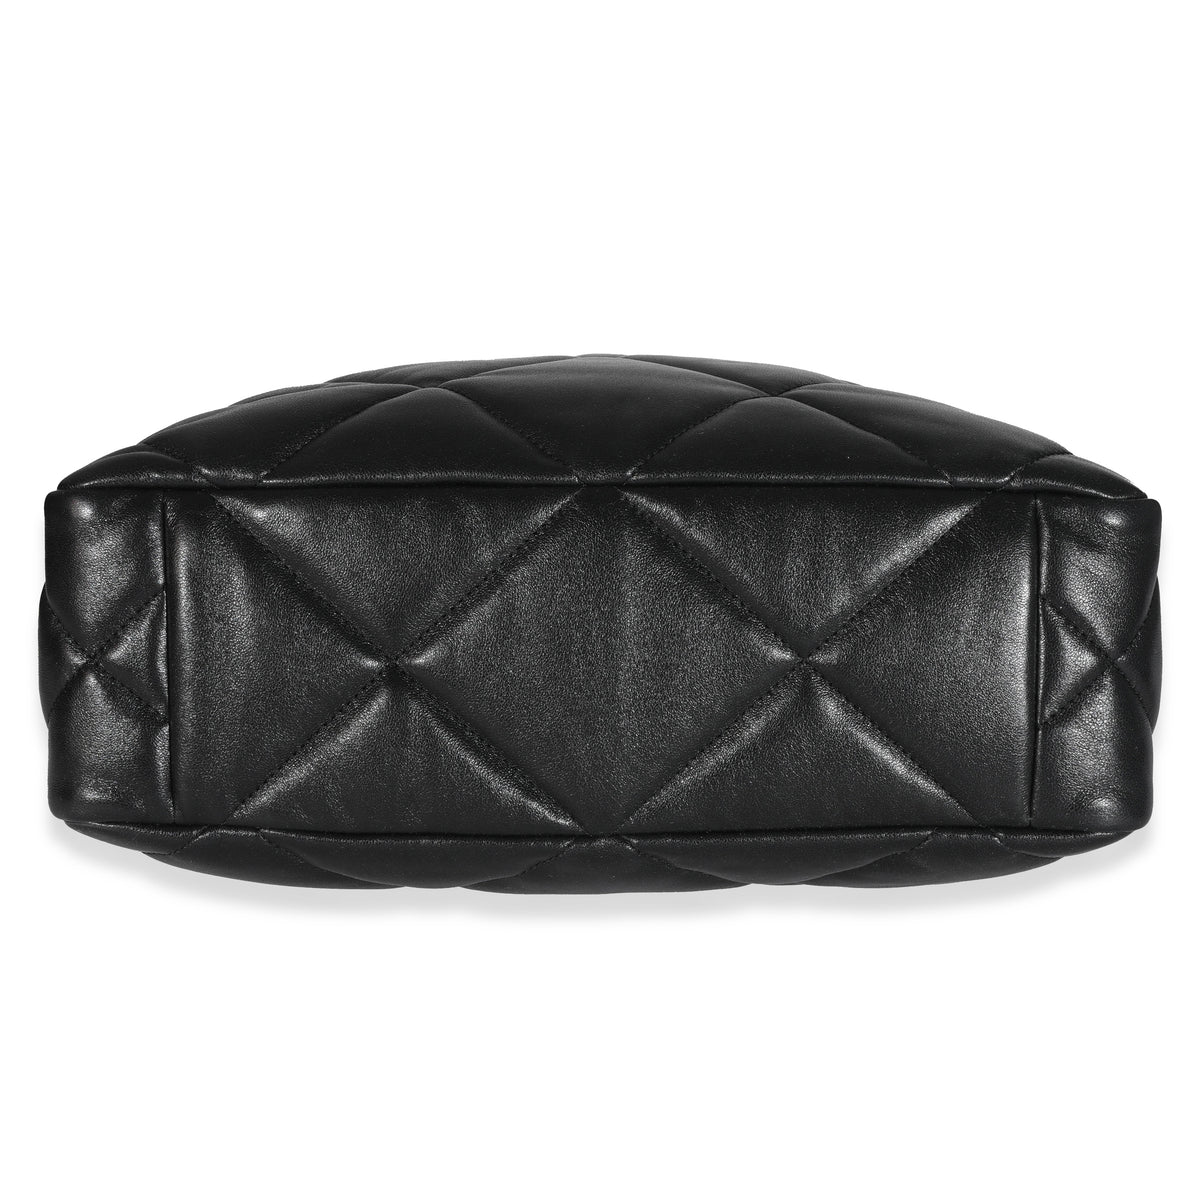 Chanel Black Lambskin Quilted Chanel 19 Shopping Bag, myGemma